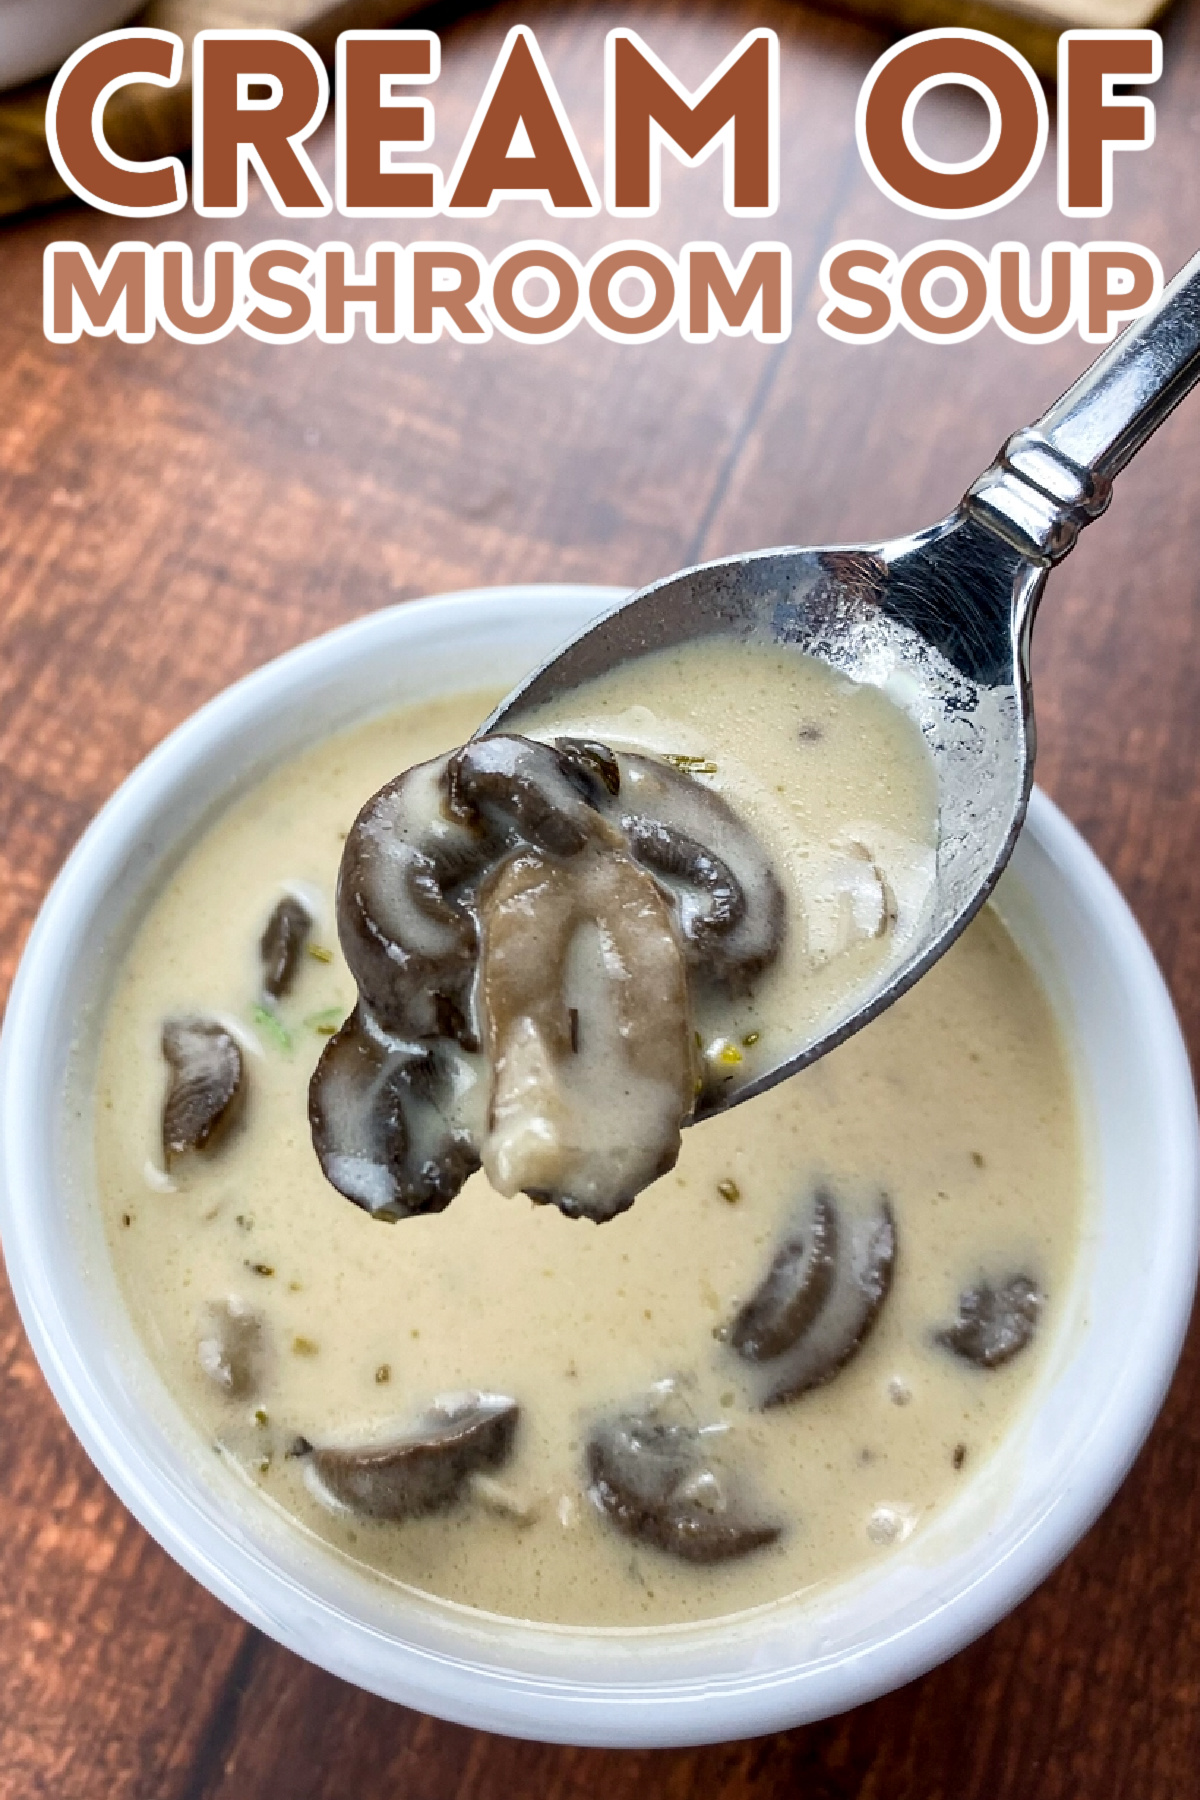 This cream of mushroom soup recipe will be your new favorite. It's rich, creamy, and has a depth that you'll never get from canned soups!